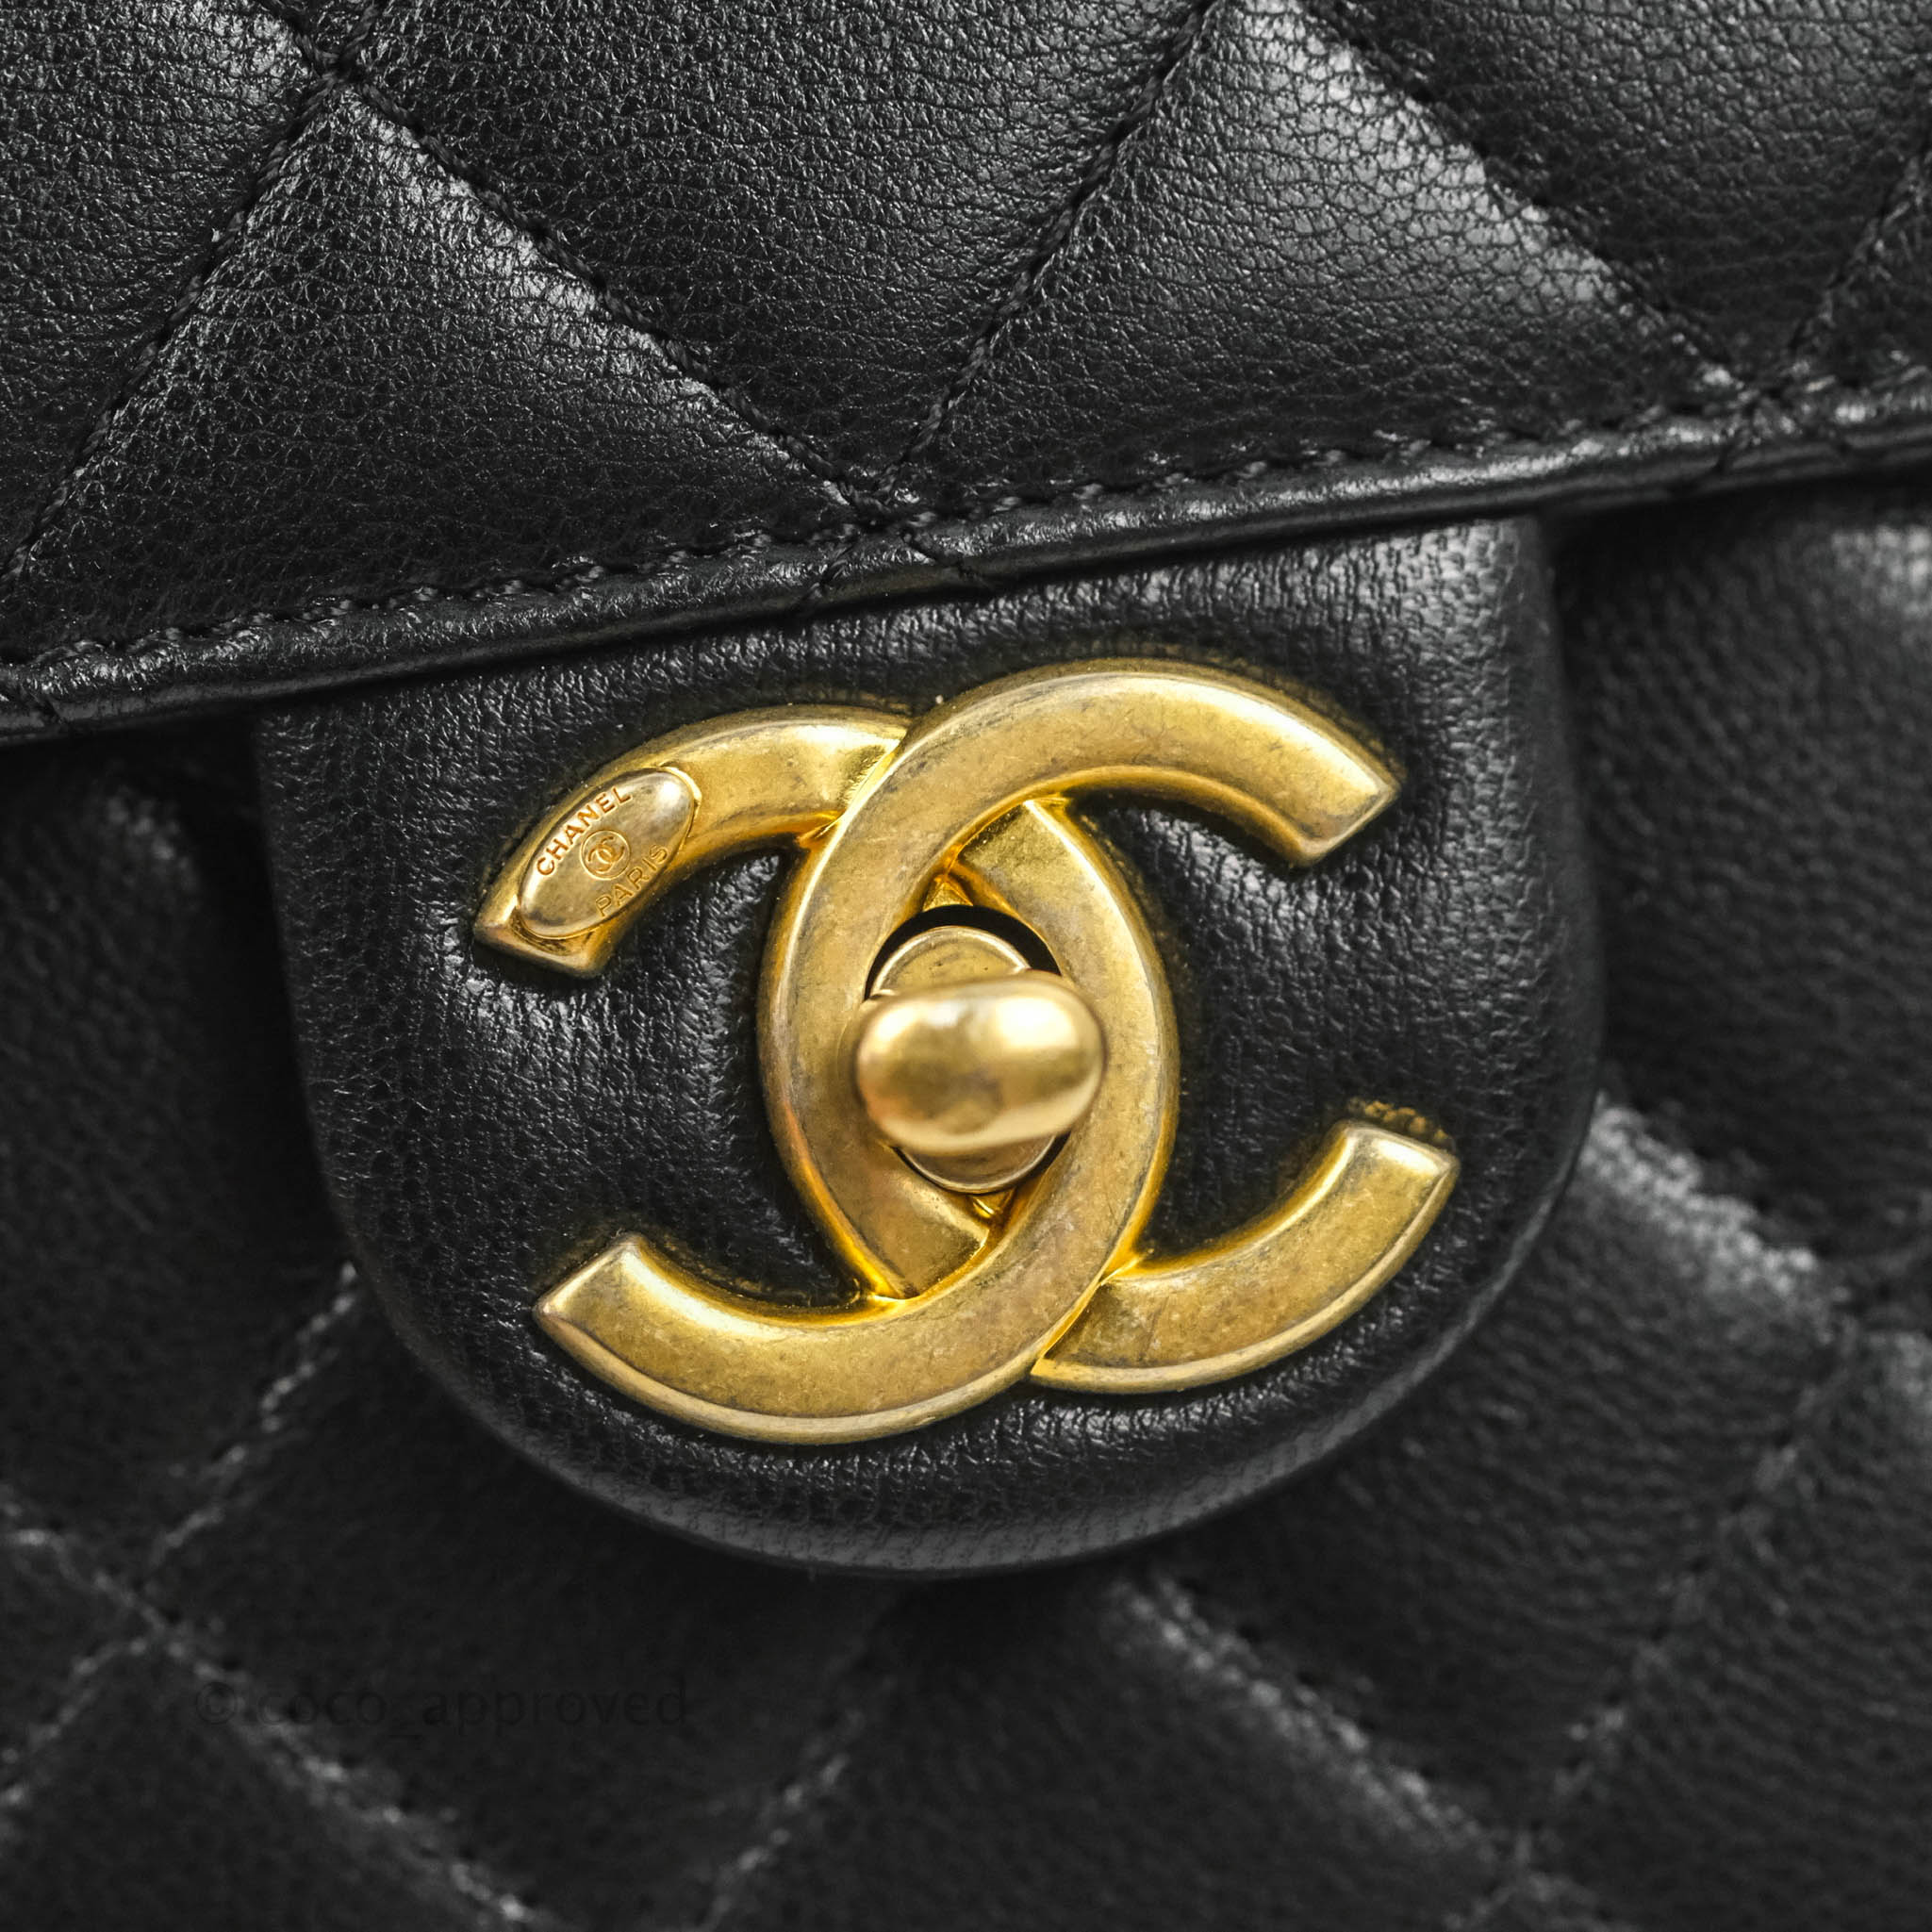 red leather chanel bag authentic